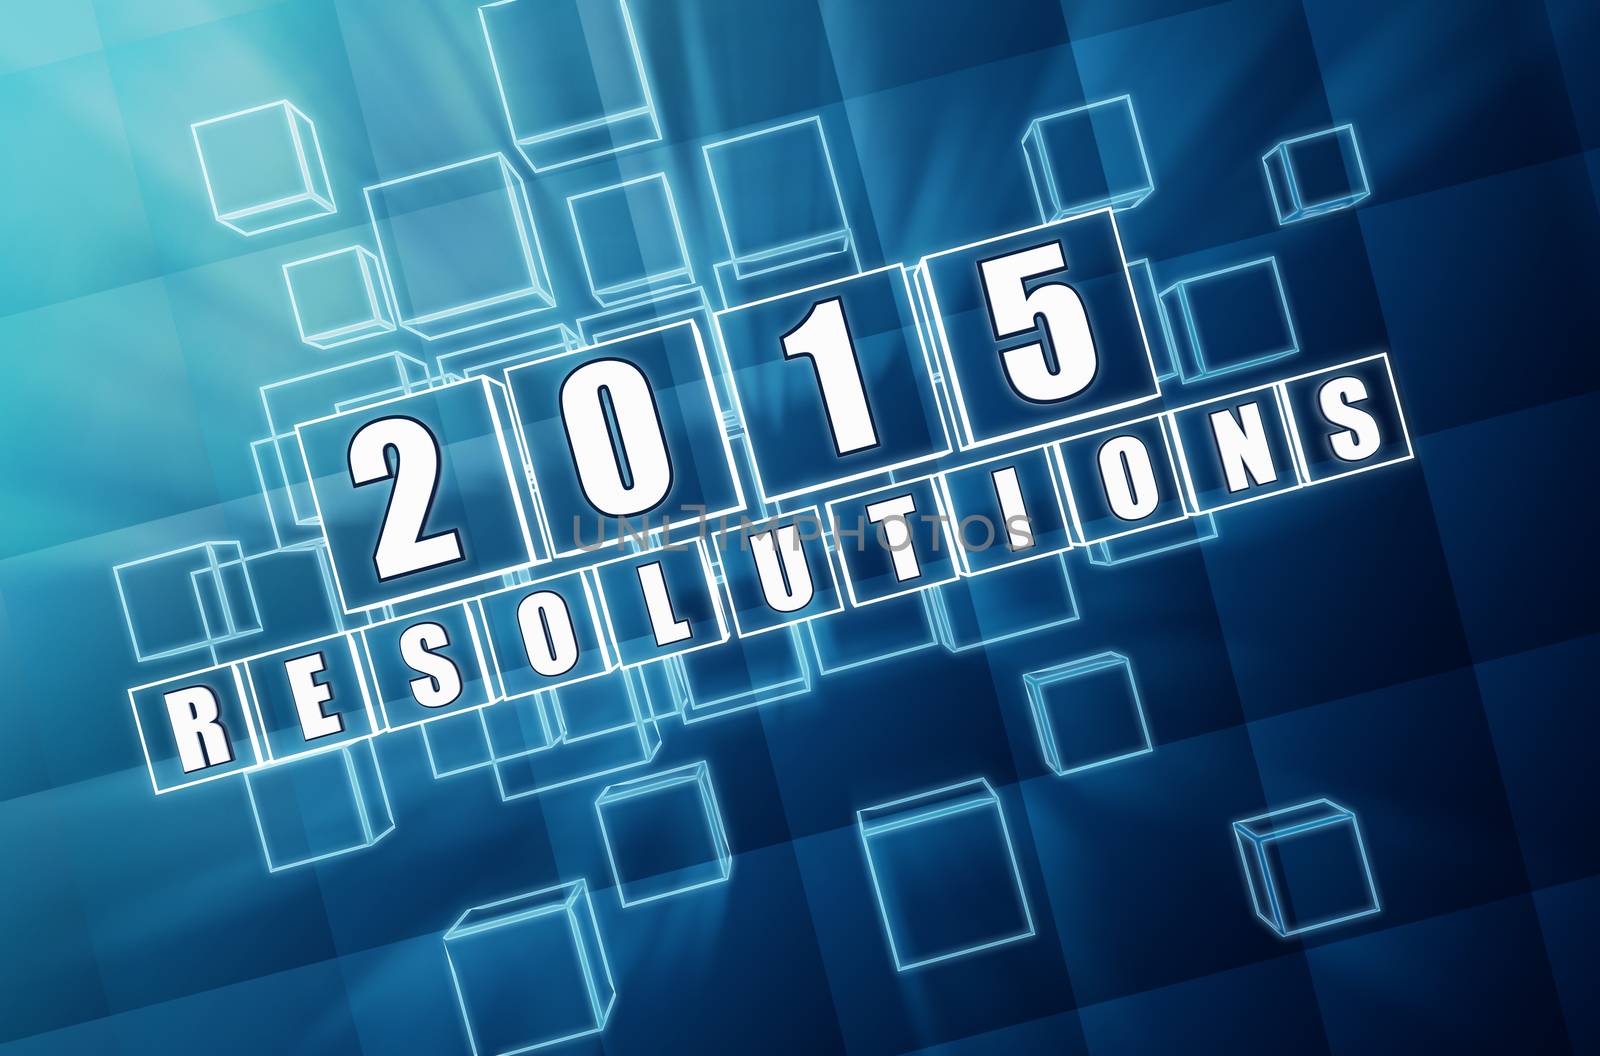 new year 2015 resolutions - text in 3d blue glass boxes with white figures, business holiday concept